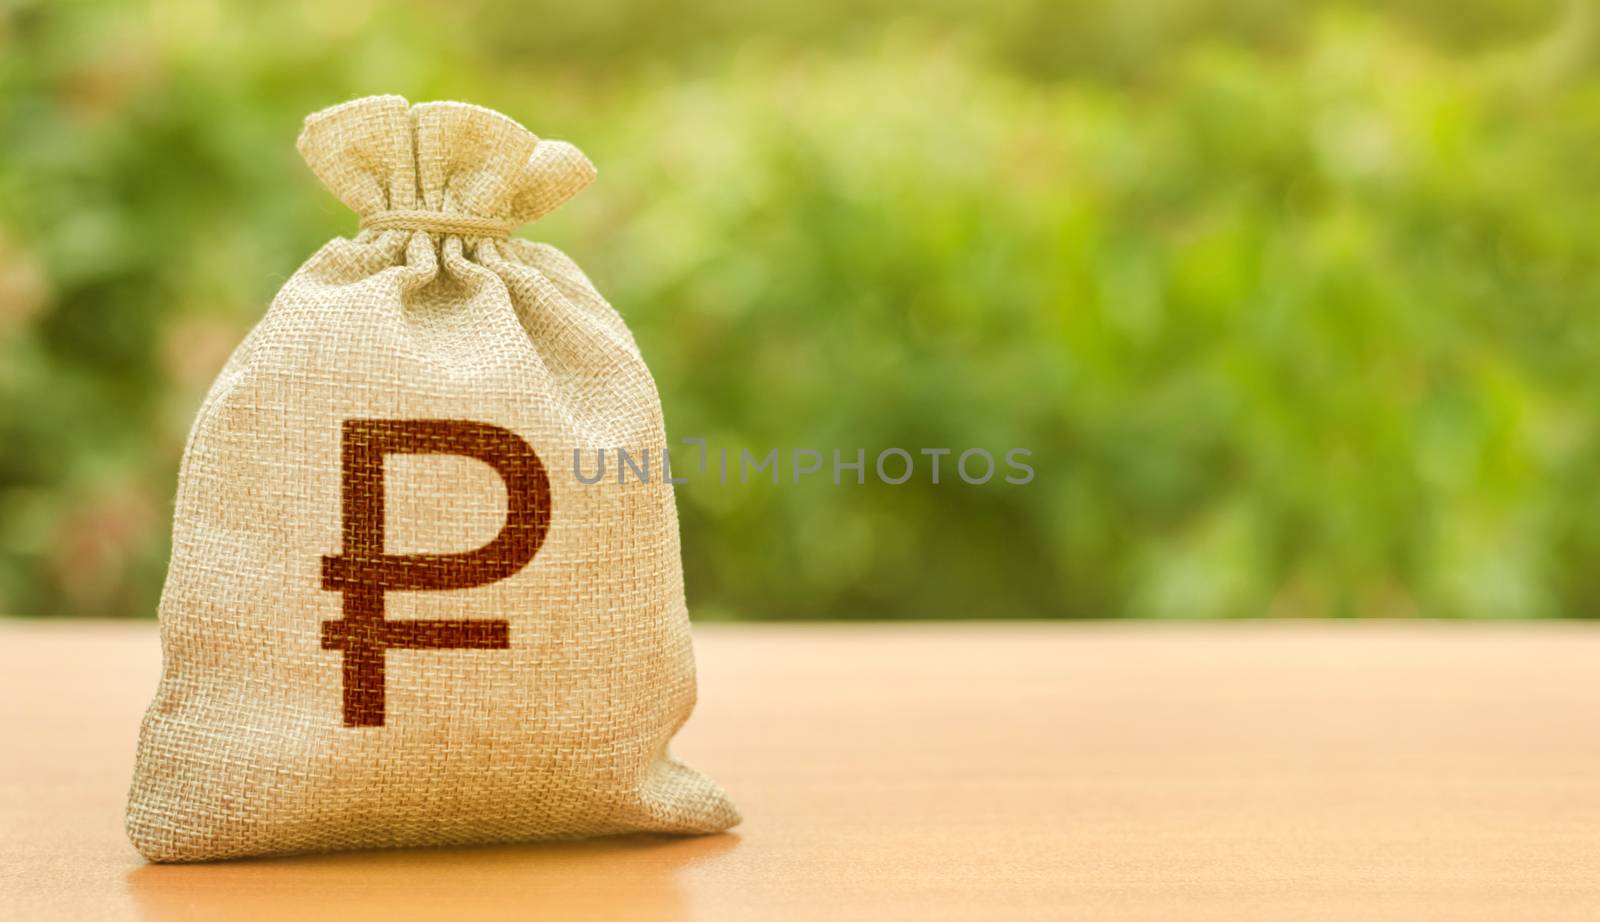 Russian ruble money bag on nature background. Finance and budgeting, investments, bank deposit interest rates. Economics, salary. Business and industry, economic processes. Profit, income, earnings